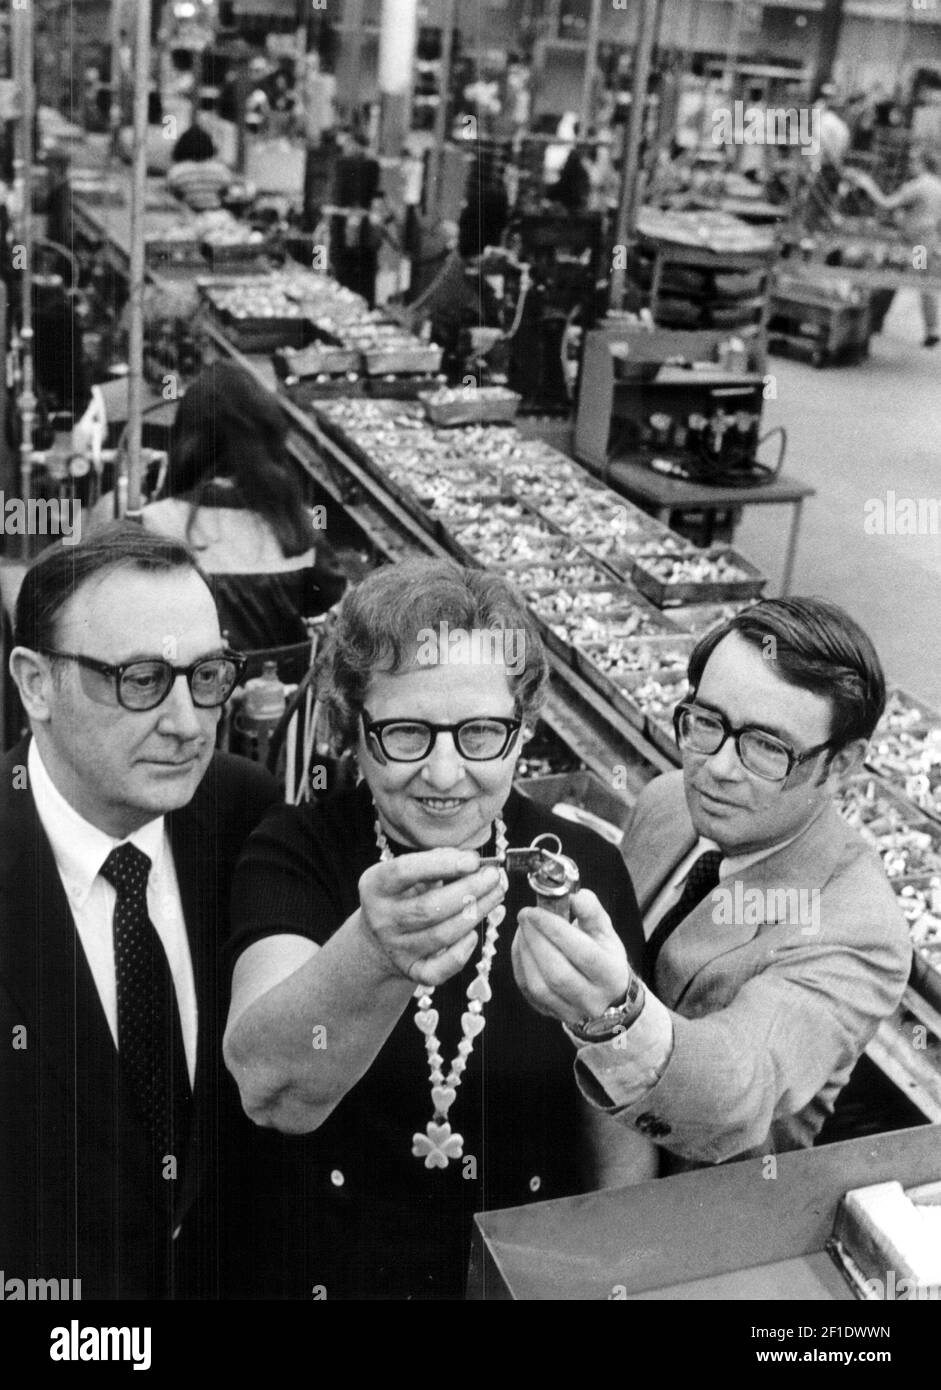 Sep 25, 1980; Milwaukee, WI, USA; When Briggs & Stratton Corp. turned out its billionth automotive lock in 1980, President Frederick P. Stratton, right, took time out for a recognition ceremony. With Stratton are Alma Hausladen, a 46-year employee and William Rollo, vice president and general manager of the Lock Division. In addition to its lock plant at 3333 W. Good Hope Rd., Glendale, where the ceremony was held, Briggs & Stratton has a lock plant in Perry, Georgia. Mandatory Credit: Milwaukee Journal Sentinel via USA TODAY NETWORK/Sipa USA Stock Photo